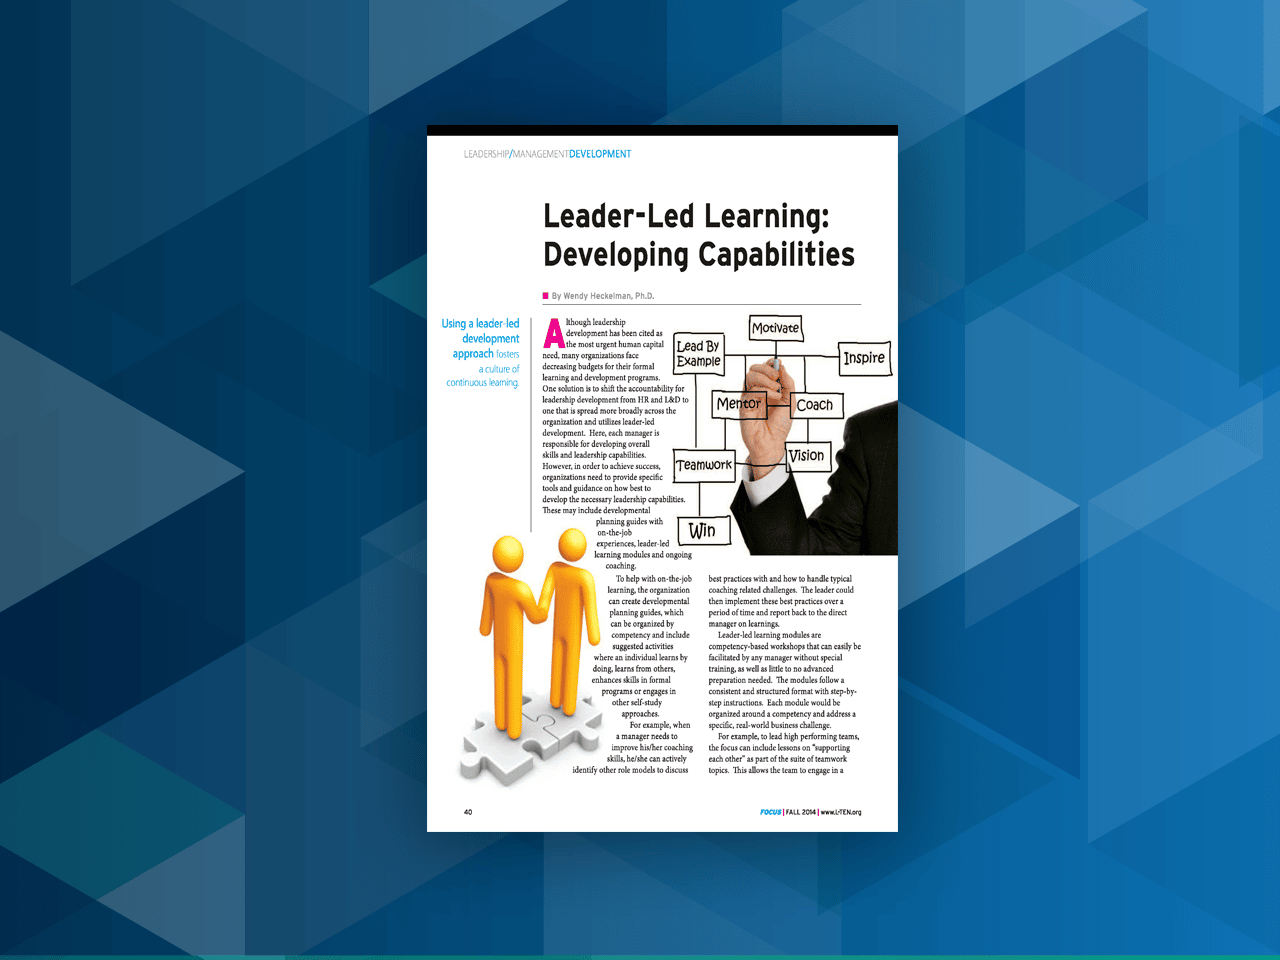 Leader-Led Learning: Developing Capabilities